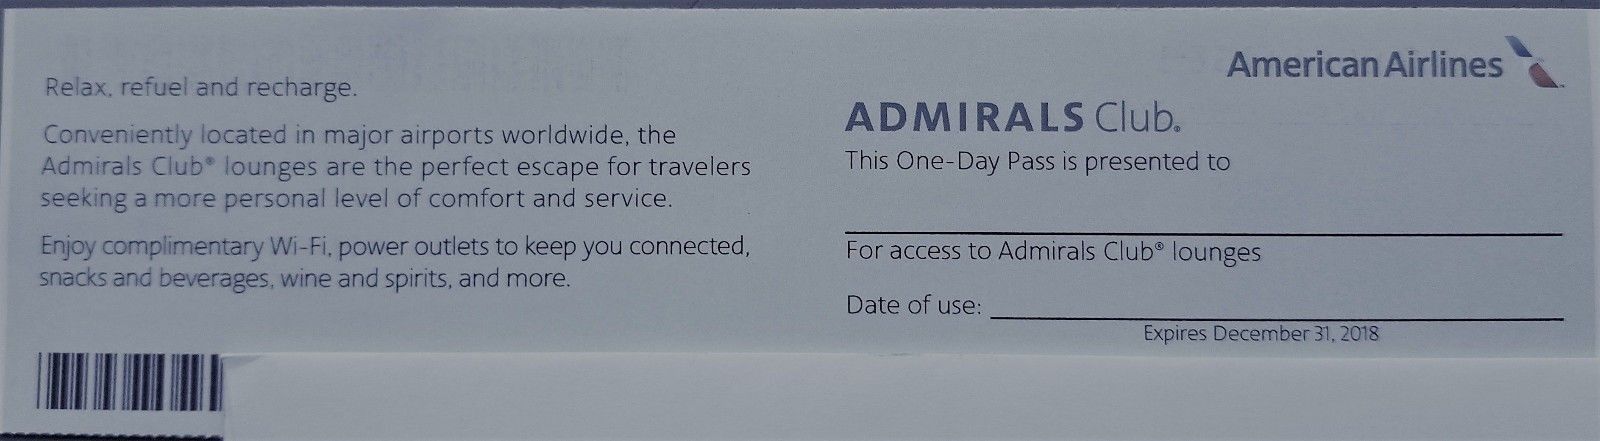 American Airlines Admirals Club One-Day Pass - Expires December 31, 2018